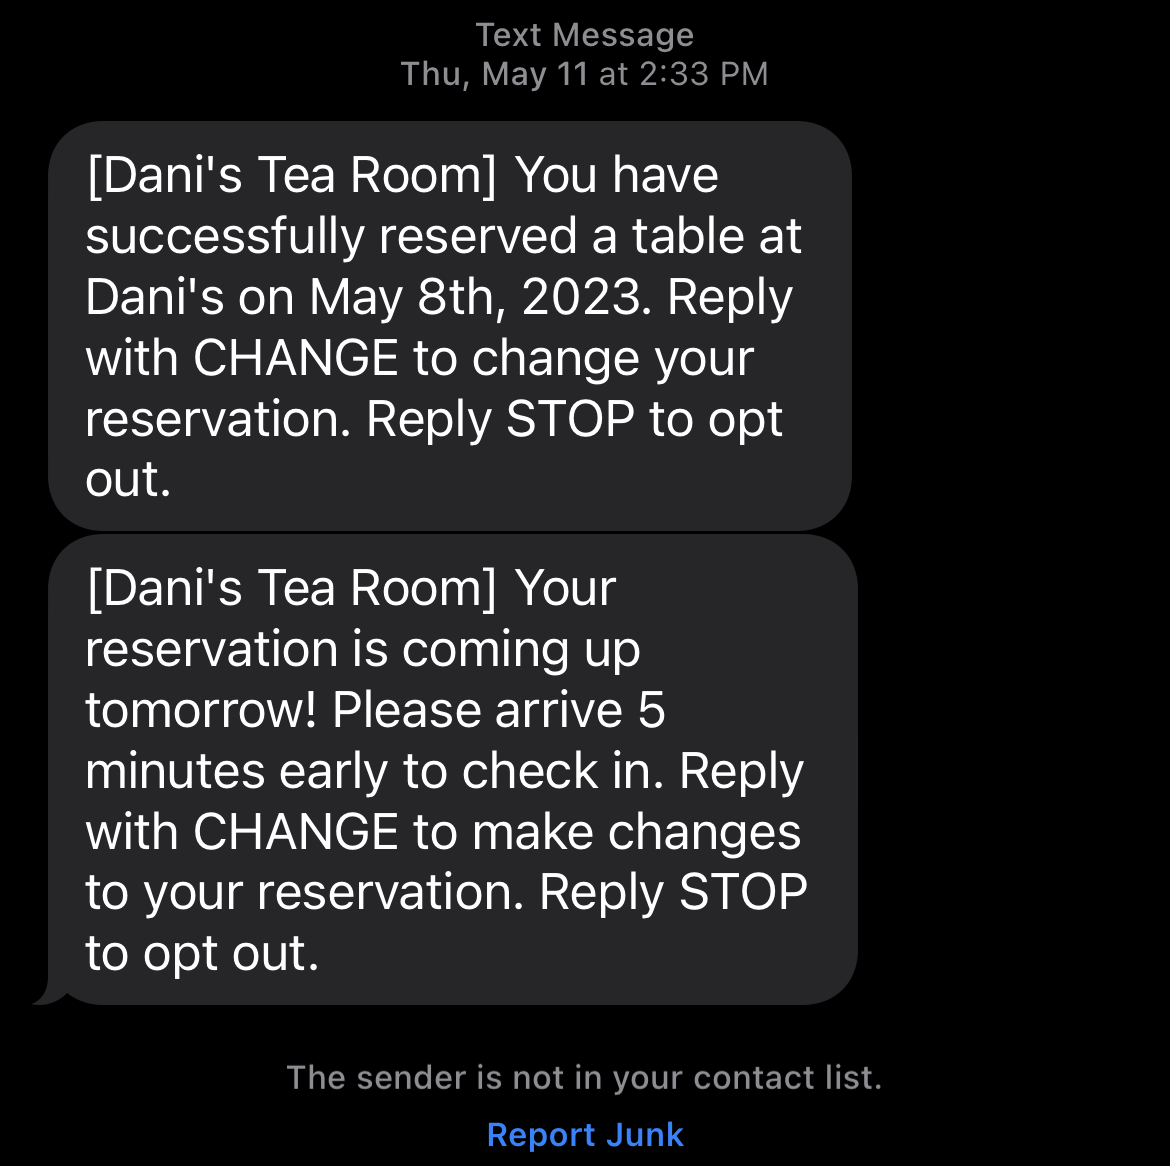 Example of an informational SMS use case for a reservation reminder.